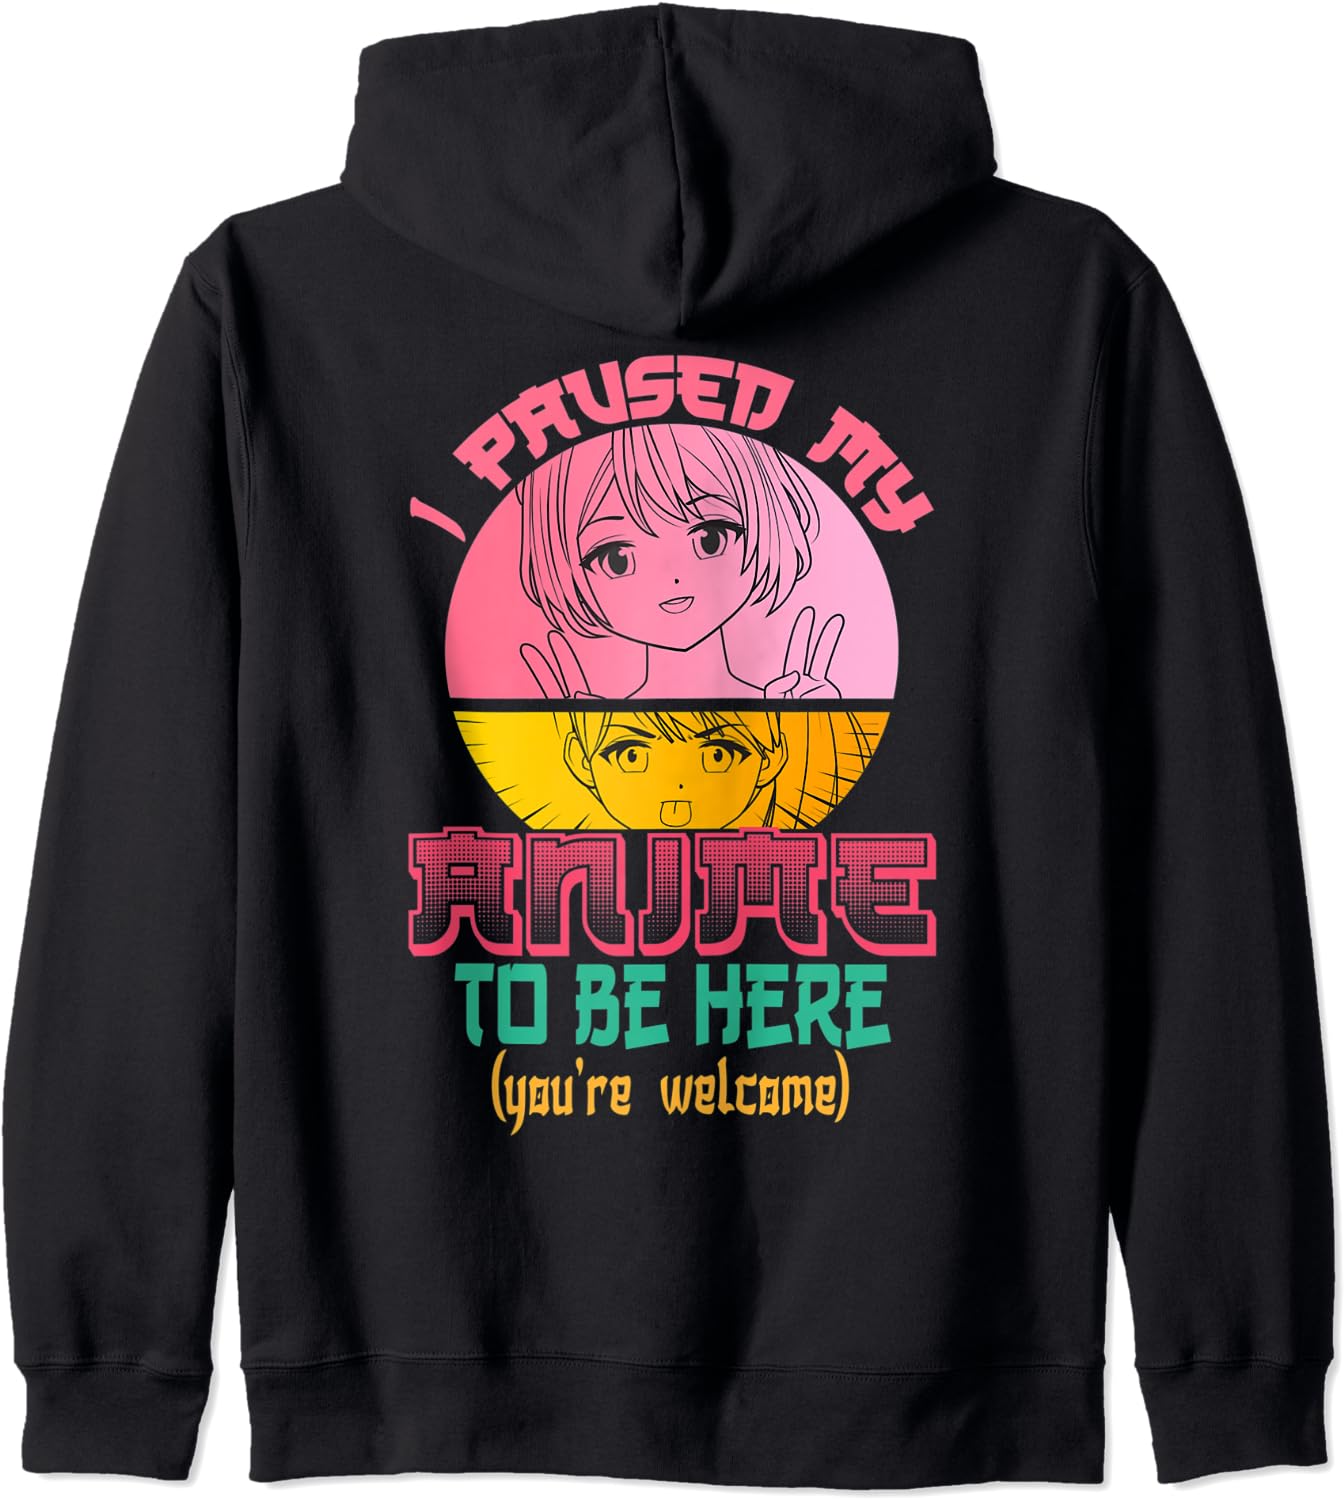 Where can I find some low-key anime clothing? : r/anime